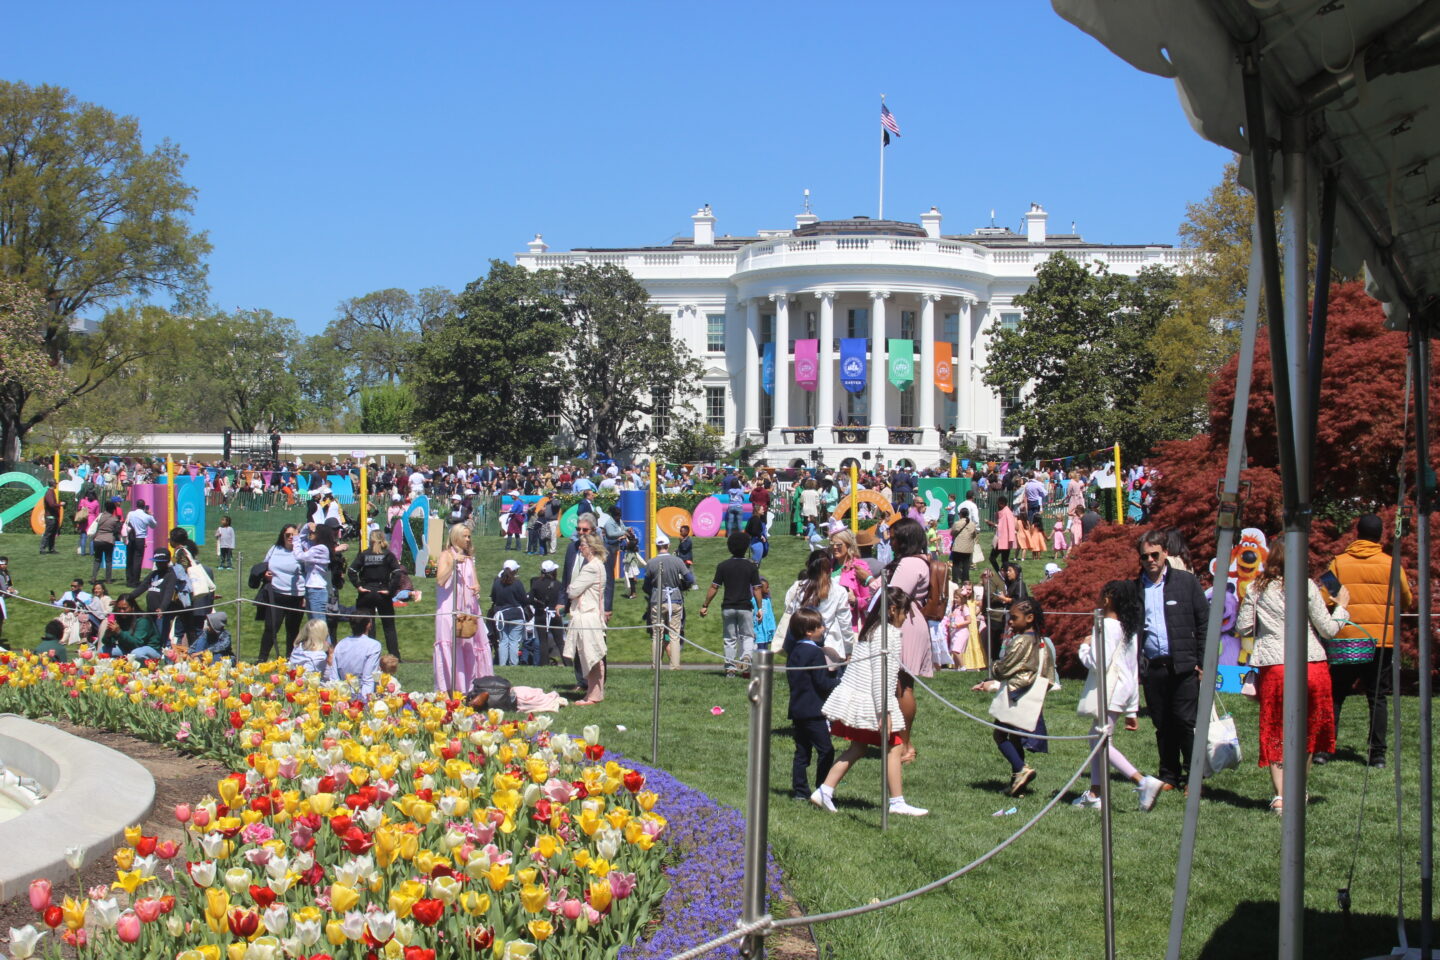 The Easter Egg Roll at the White House